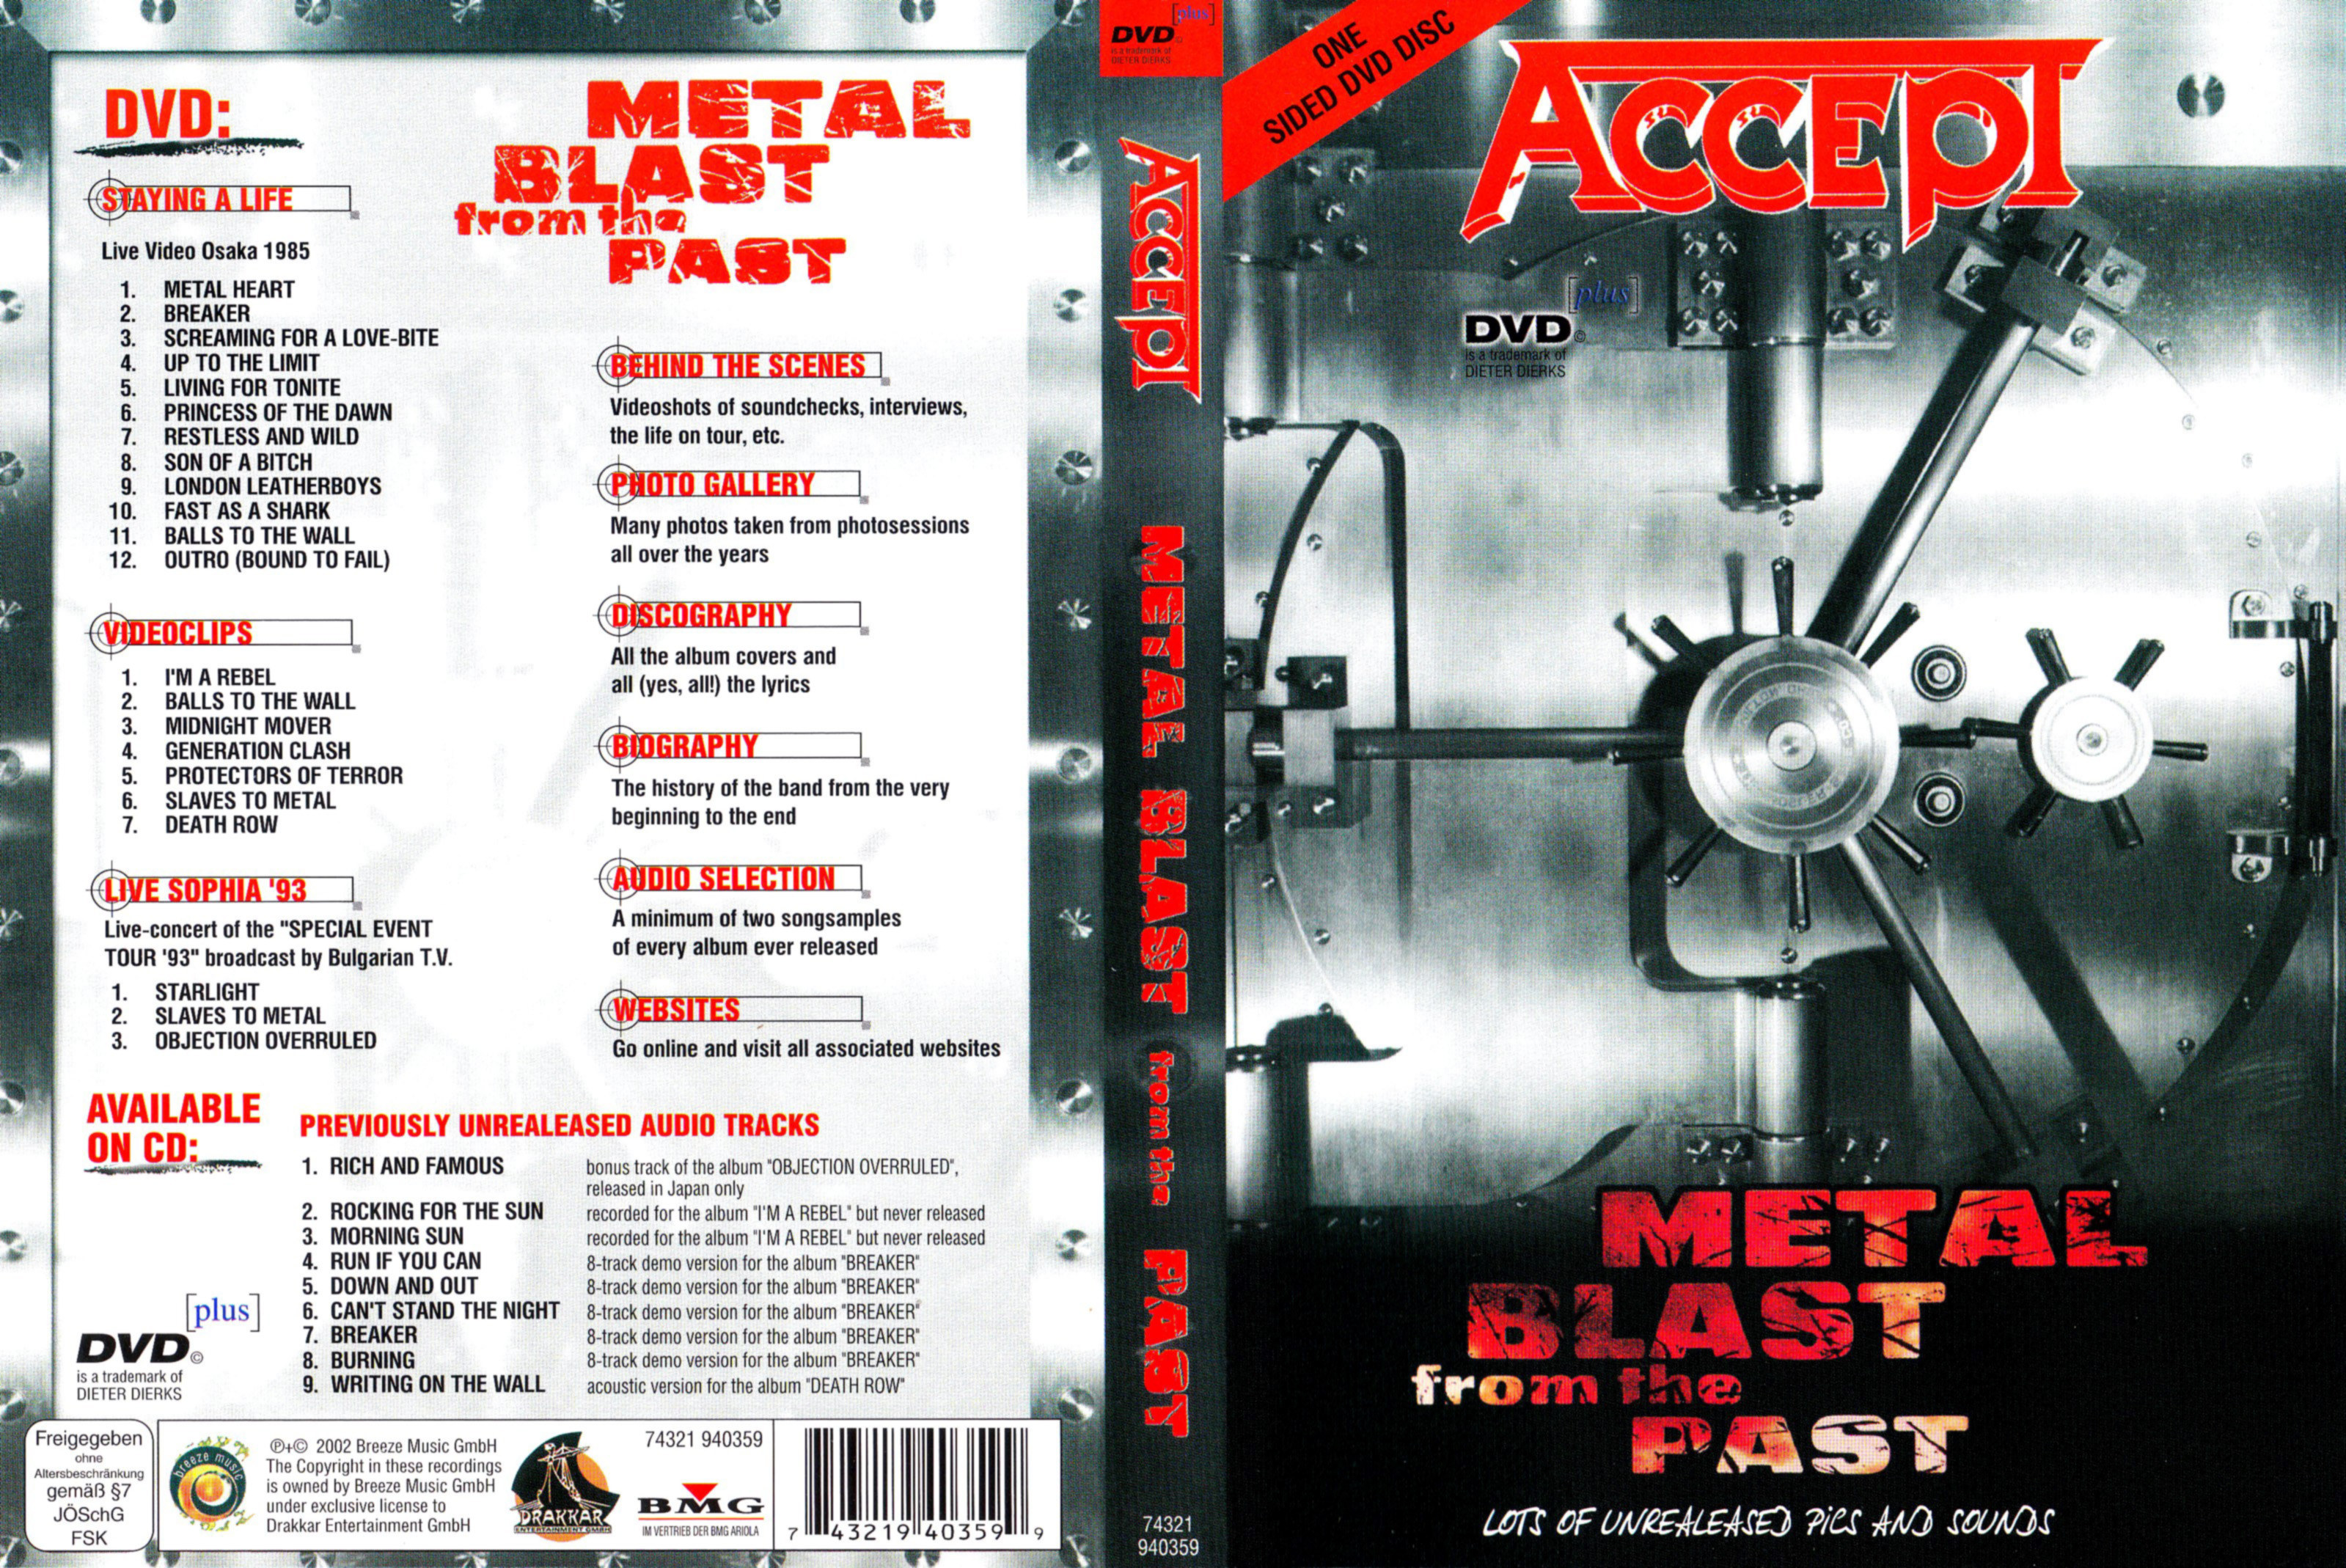 Jaquette DVD Accept Metal Blast from the Past